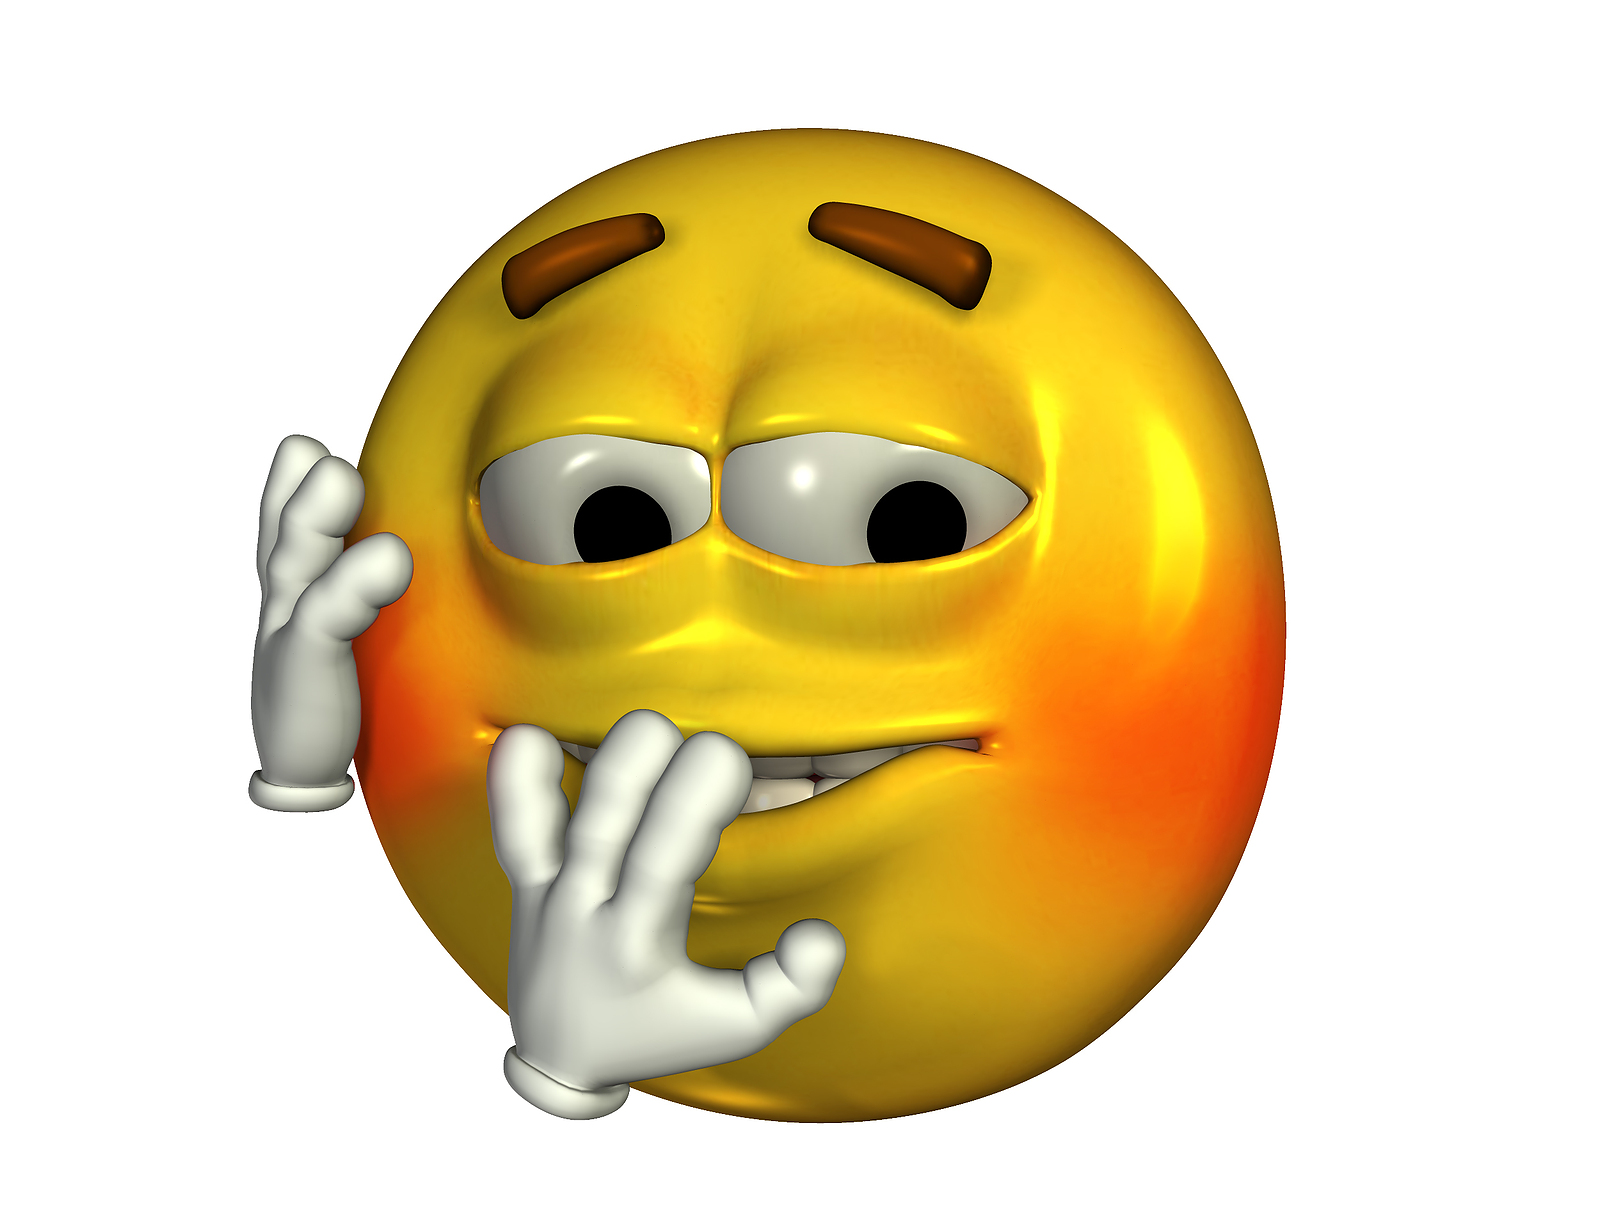 Clipart embarrassed smiley face